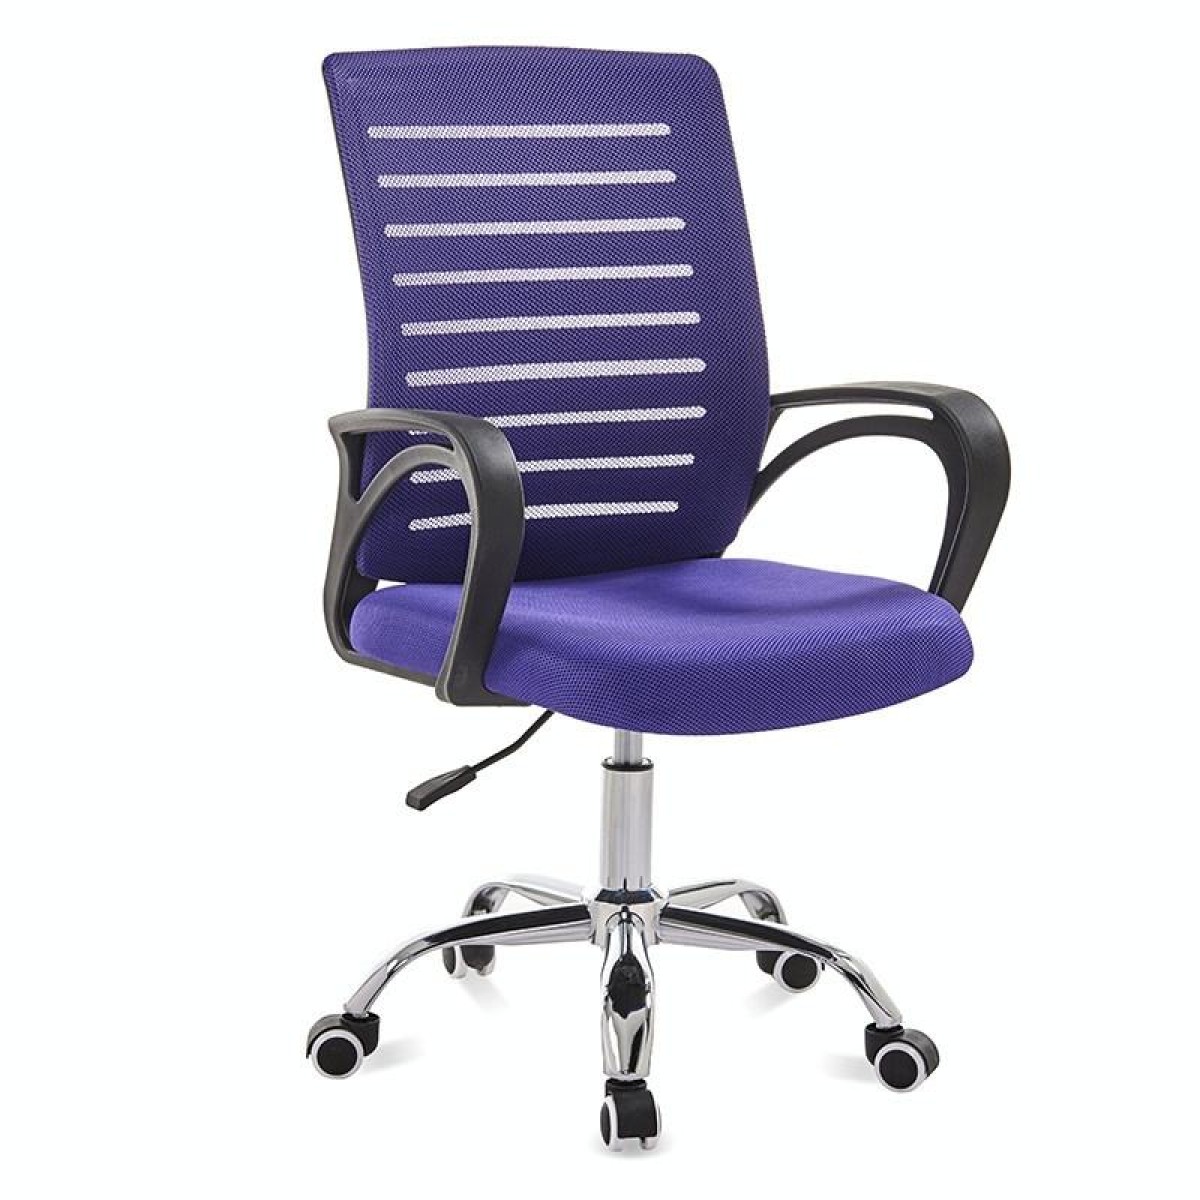 9050 Computer Chair Office Chair Home Back Chair Comfortable Black Frame Simple Desk Chair (Purple)